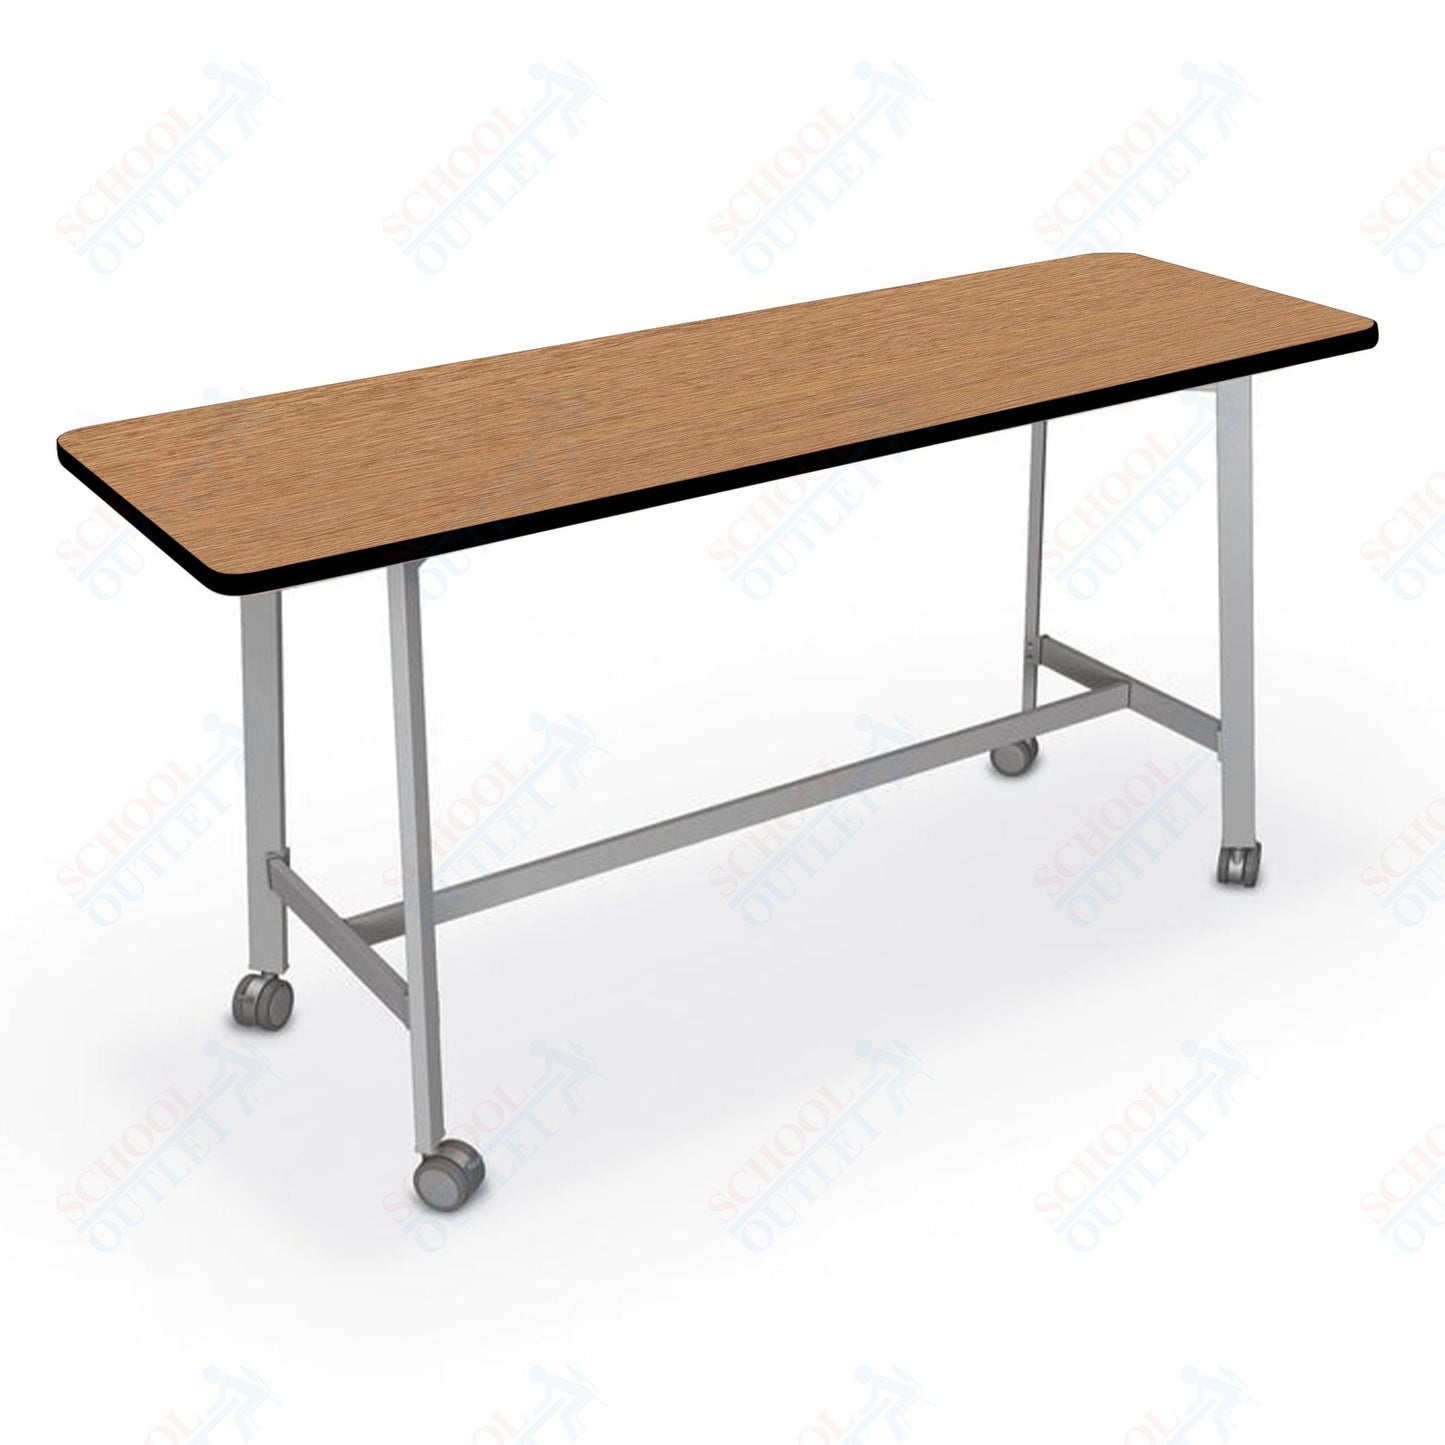 Mooreco Akt Table – 20"D x 72"W Rectangle, Laminate Top, Fixed Height Available in 29"H, 36"H, or 42"H